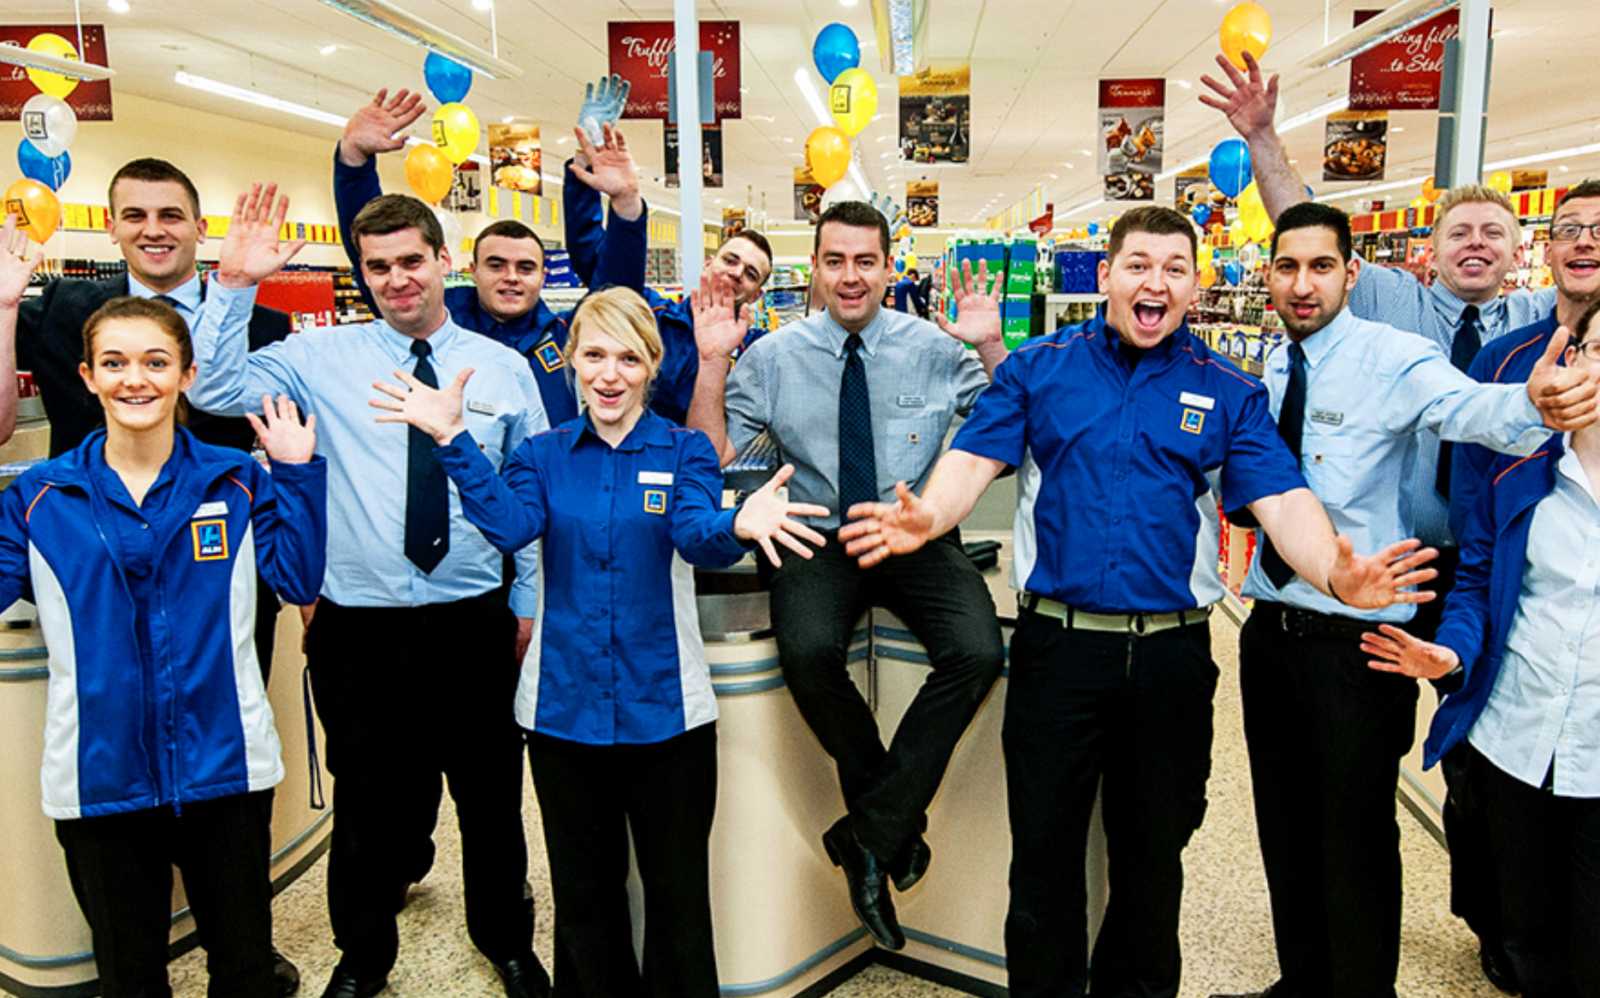 Join Aldi's Team! Exciting Job Opportunities Await You!